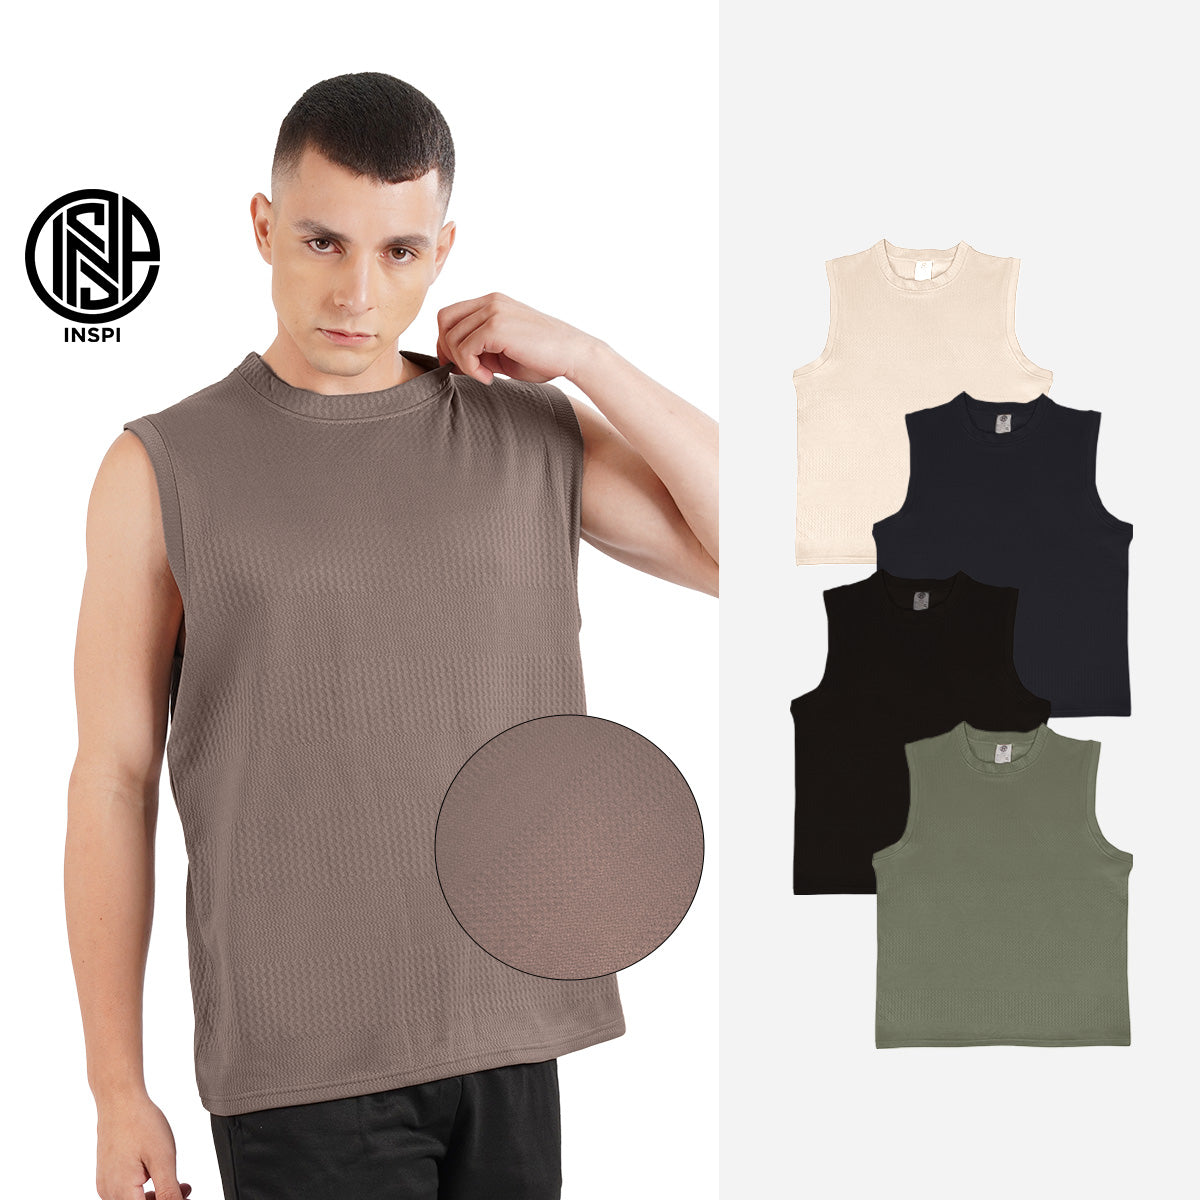 INSPI Textured Muscle Tee Collection For Men Sleeveless Striped Light Olive Tank Top Sando For Women Gym Workout Clothes Exercise Outfit